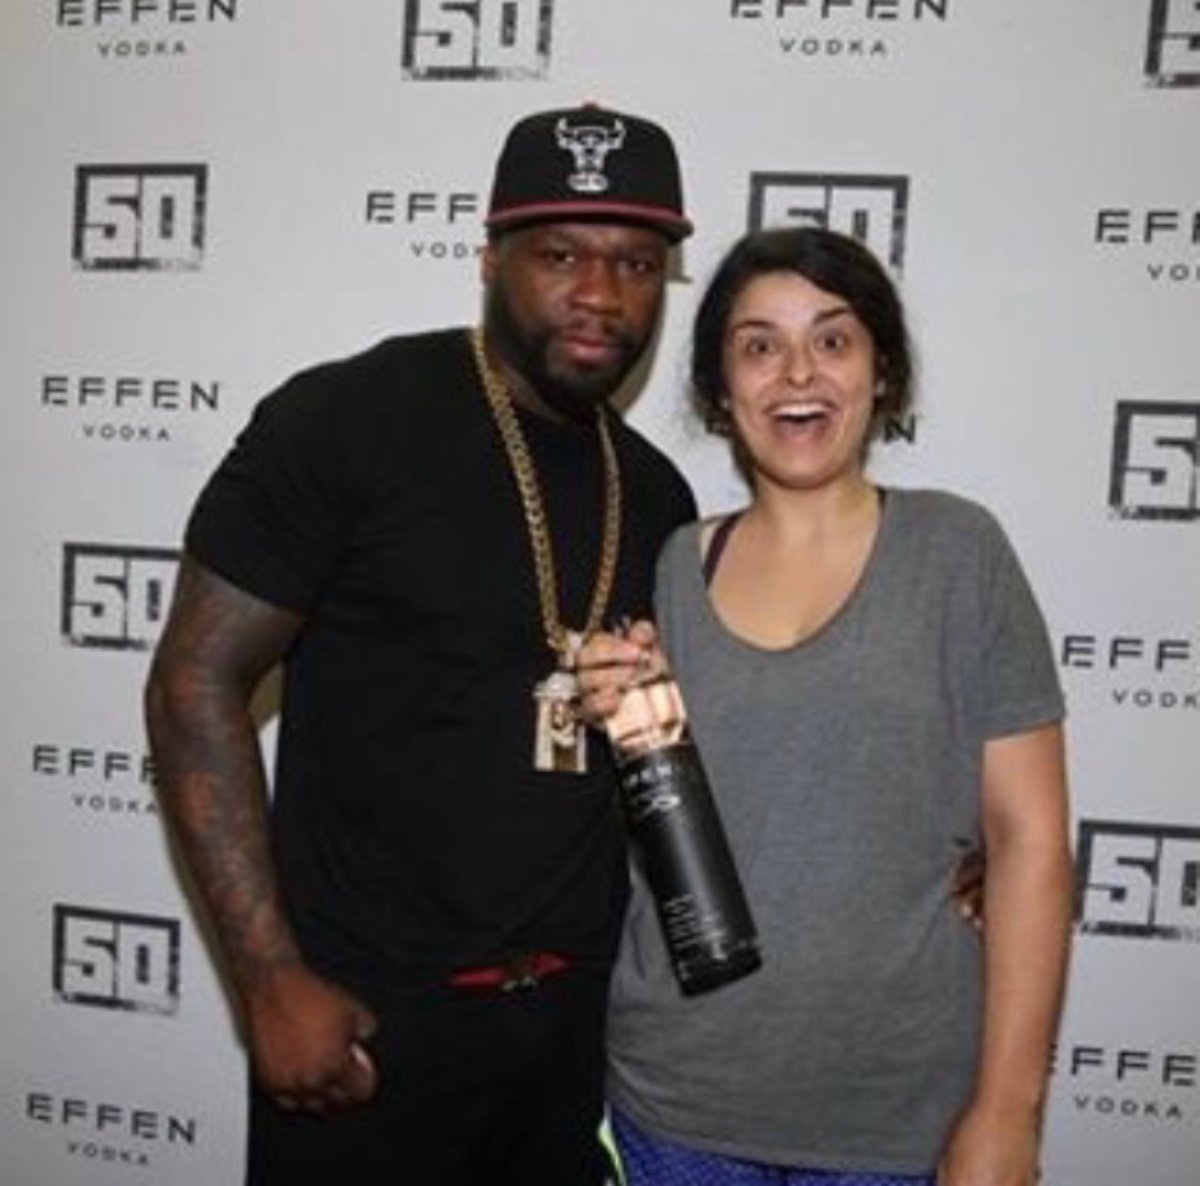 here’s me and 50 cent, hope this helps